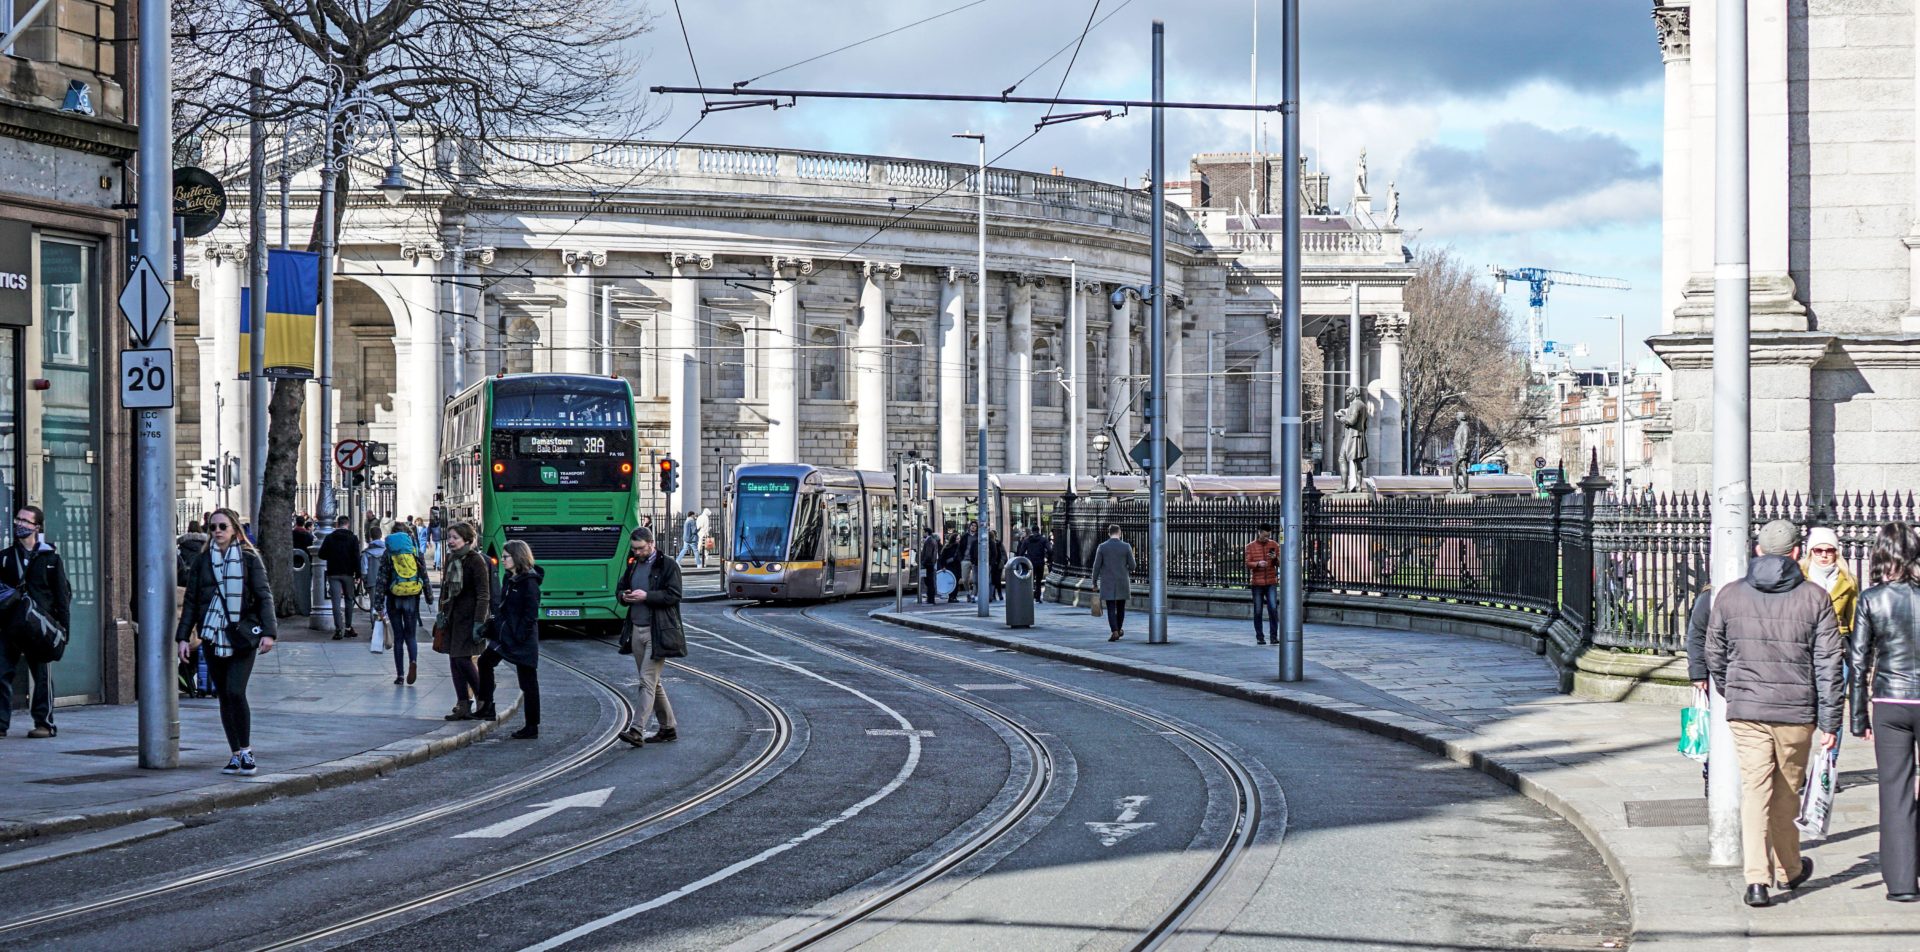 The busy junction of Grafton Street and College Green, Dublin, Ireland where many forms of transport converge.